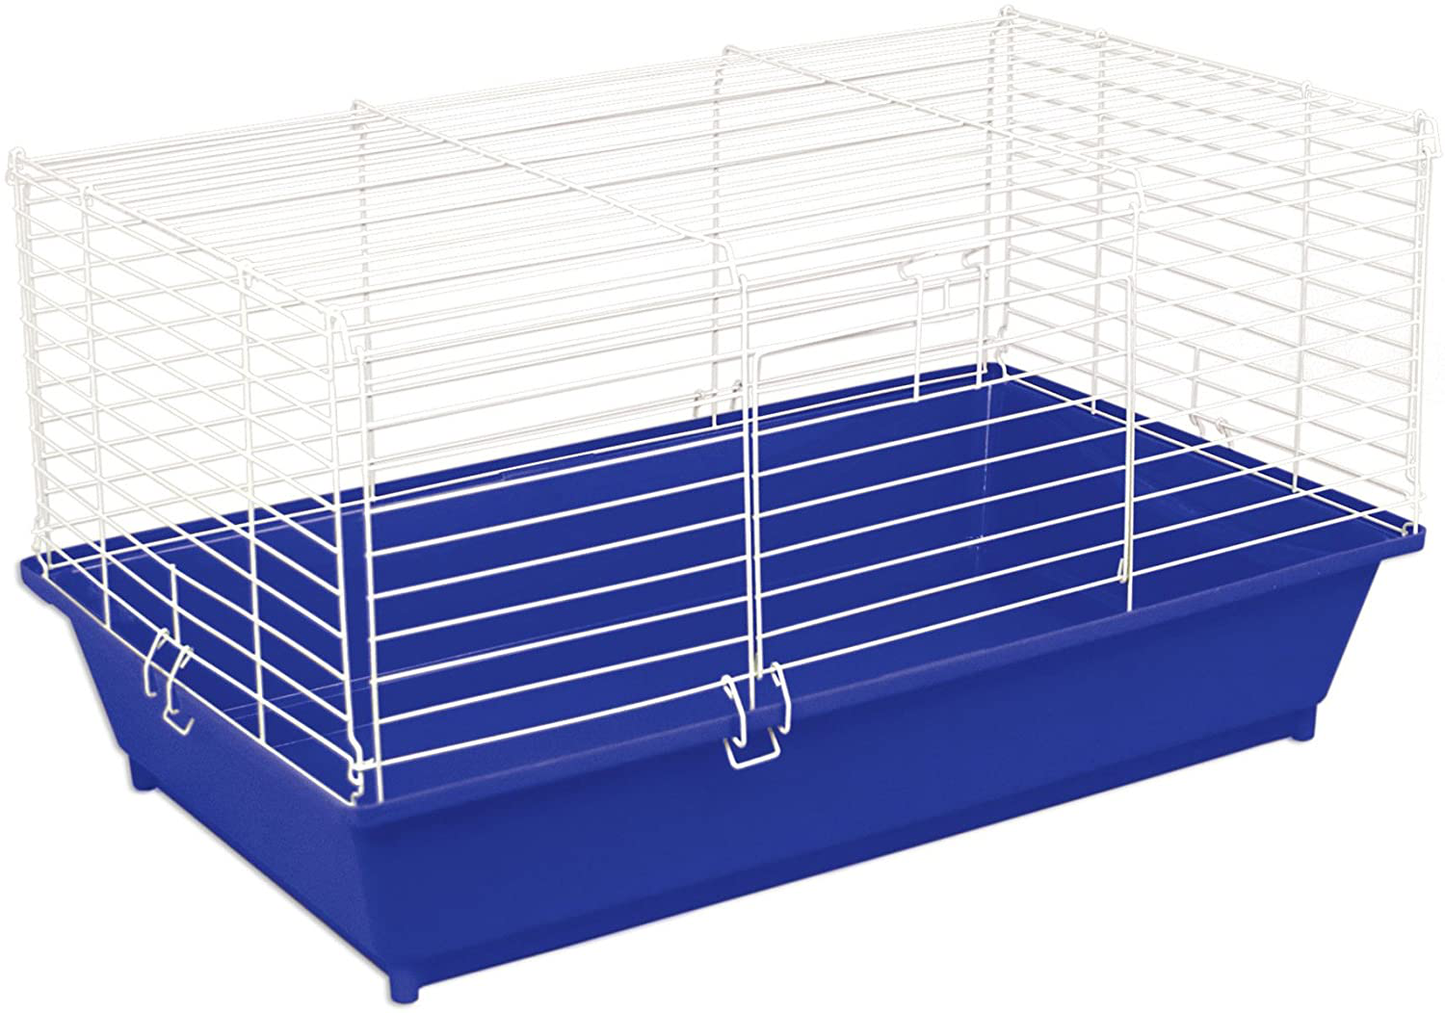 Ware Manufacturing Home Sweet Home Sunseed Guinea Pig Cage Starter Kit